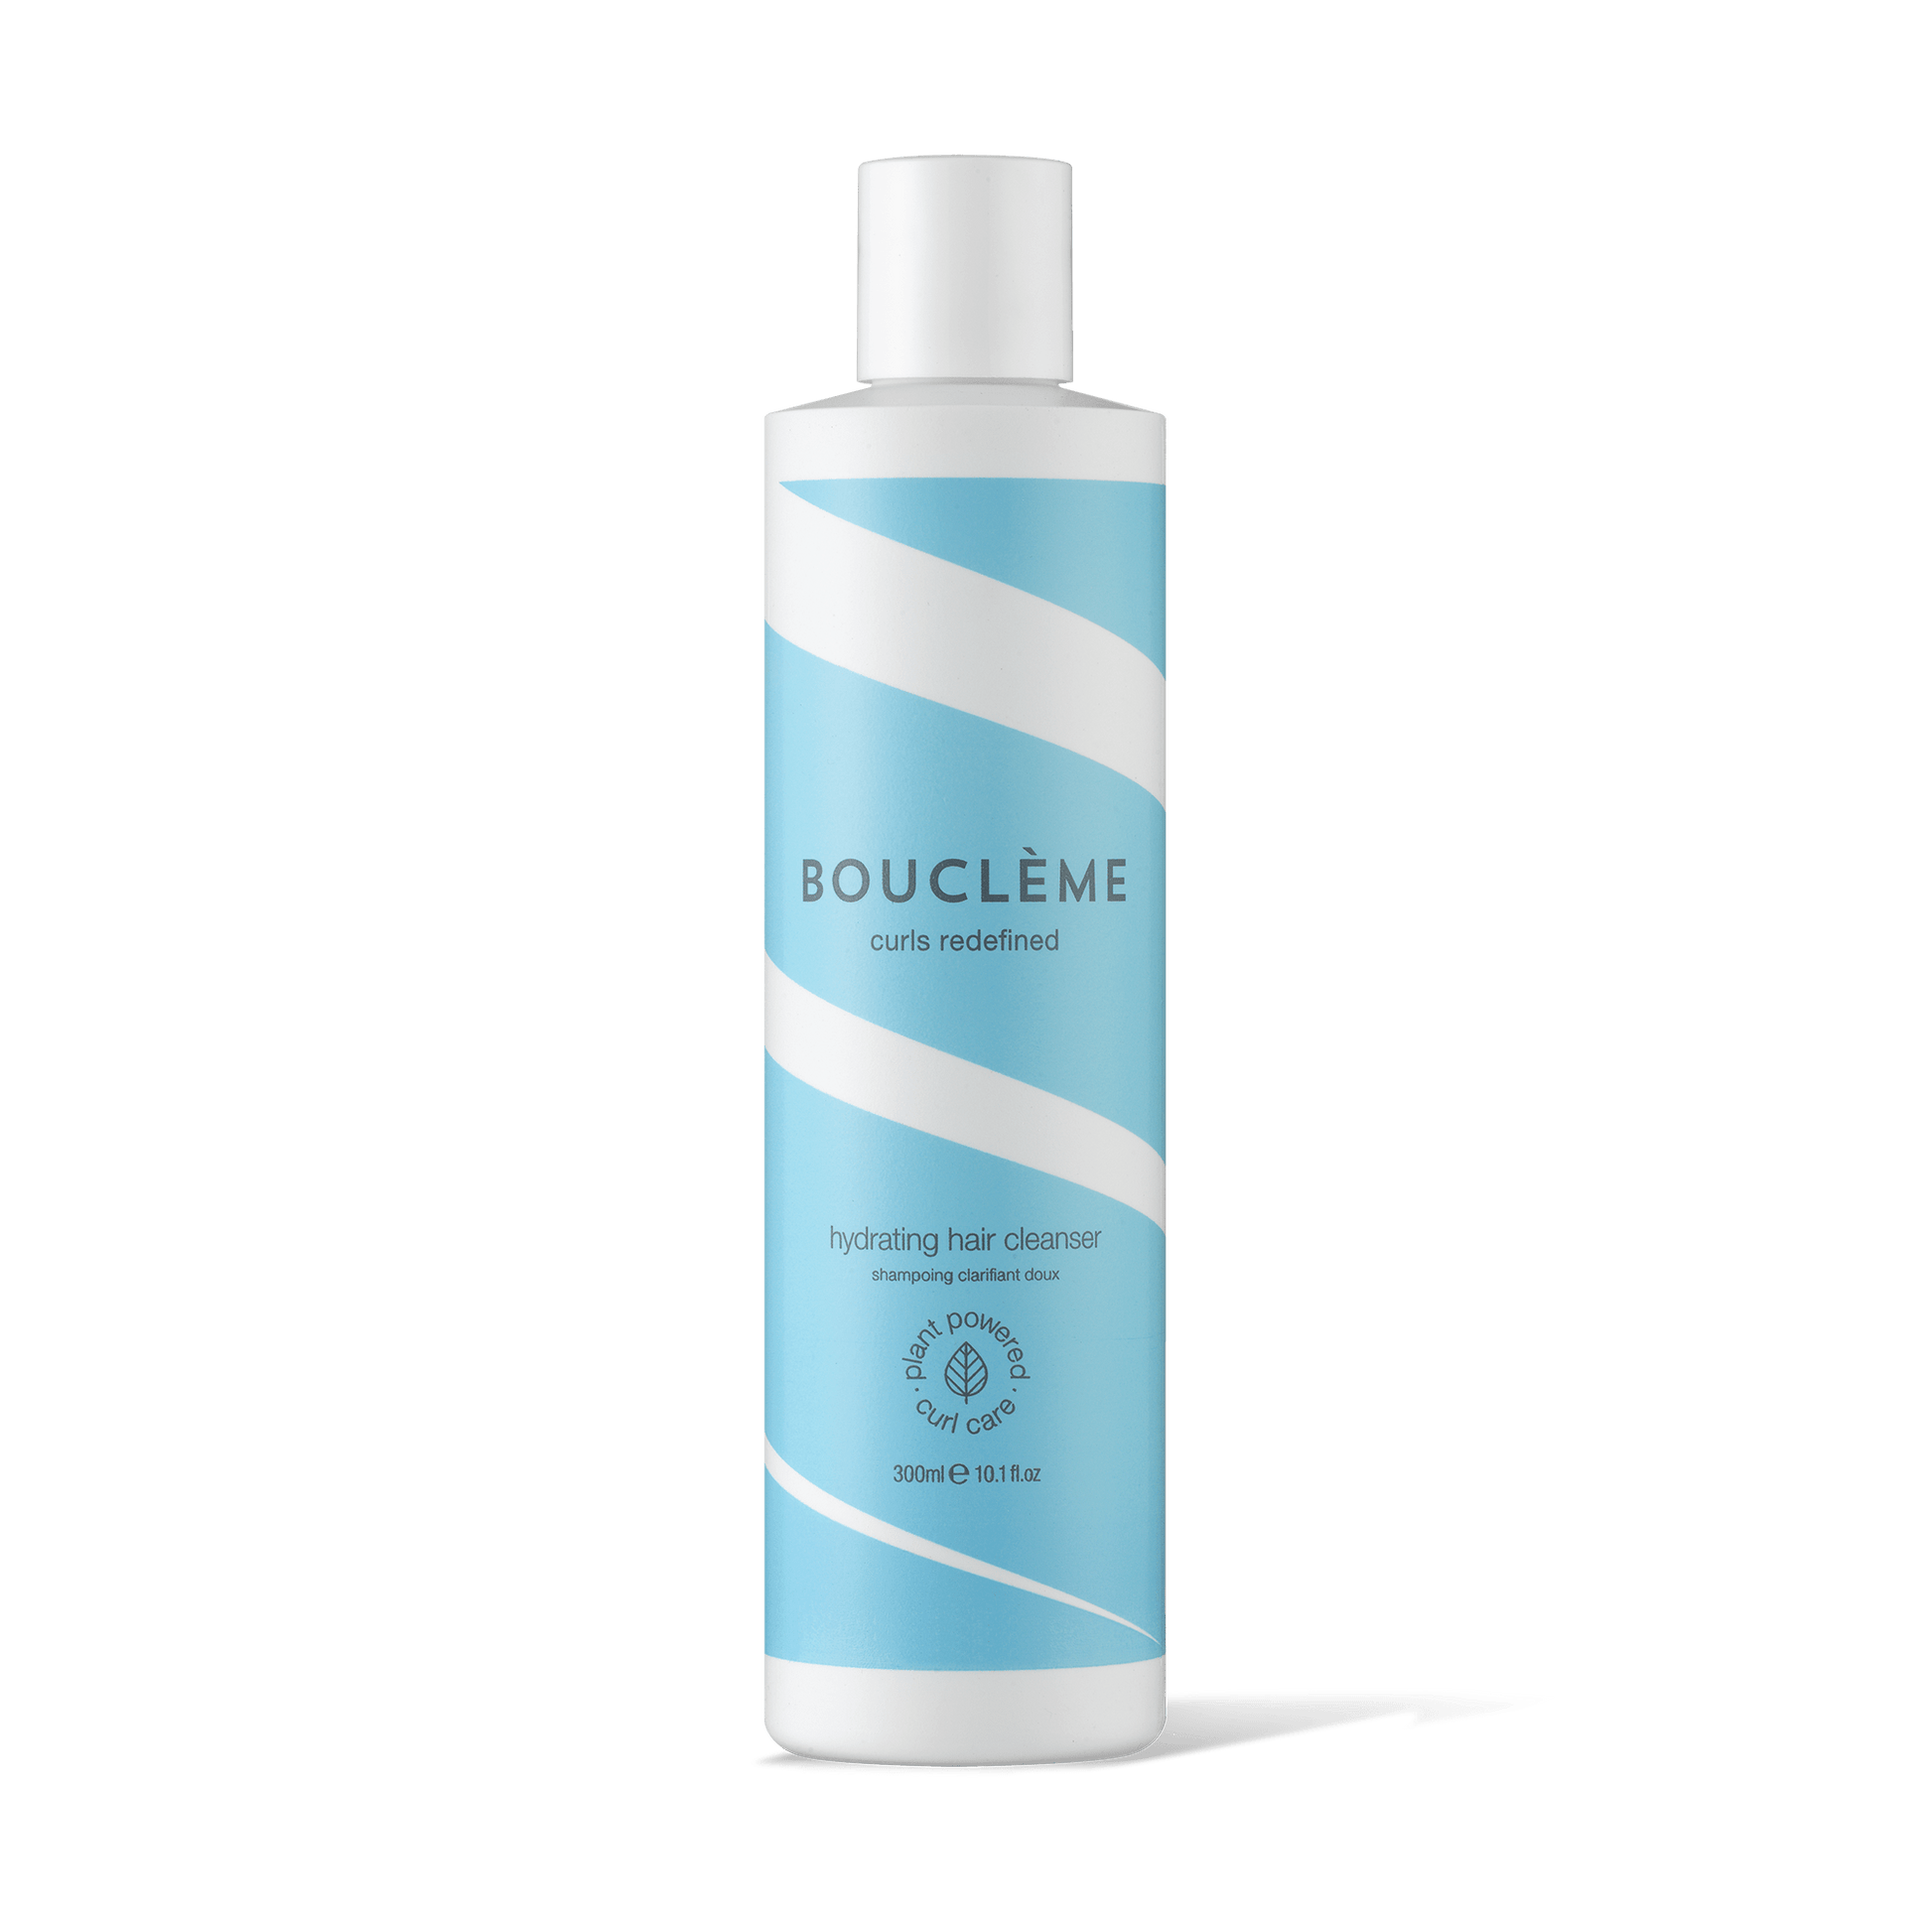 Low foaming, curl defining, sulphate-free shampoo ideal for fine, wavy hair and oily scalps.